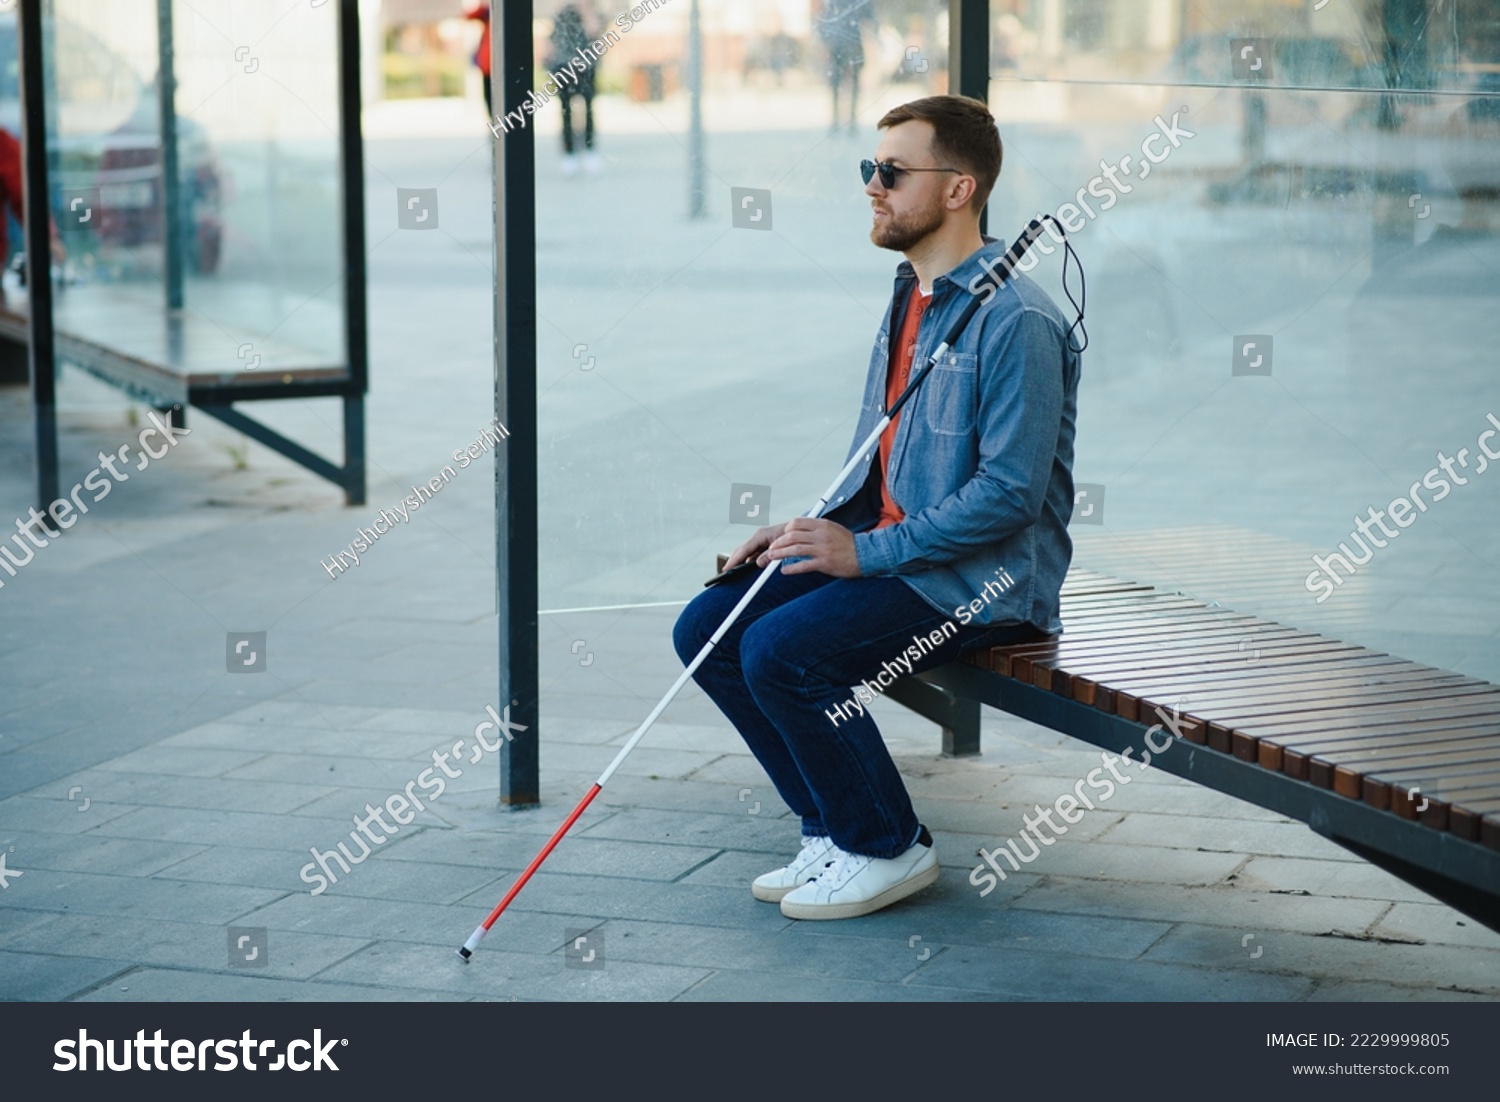 Visually impaired man with walking stick, sitting on bench in city park. Copy space. #2229999805